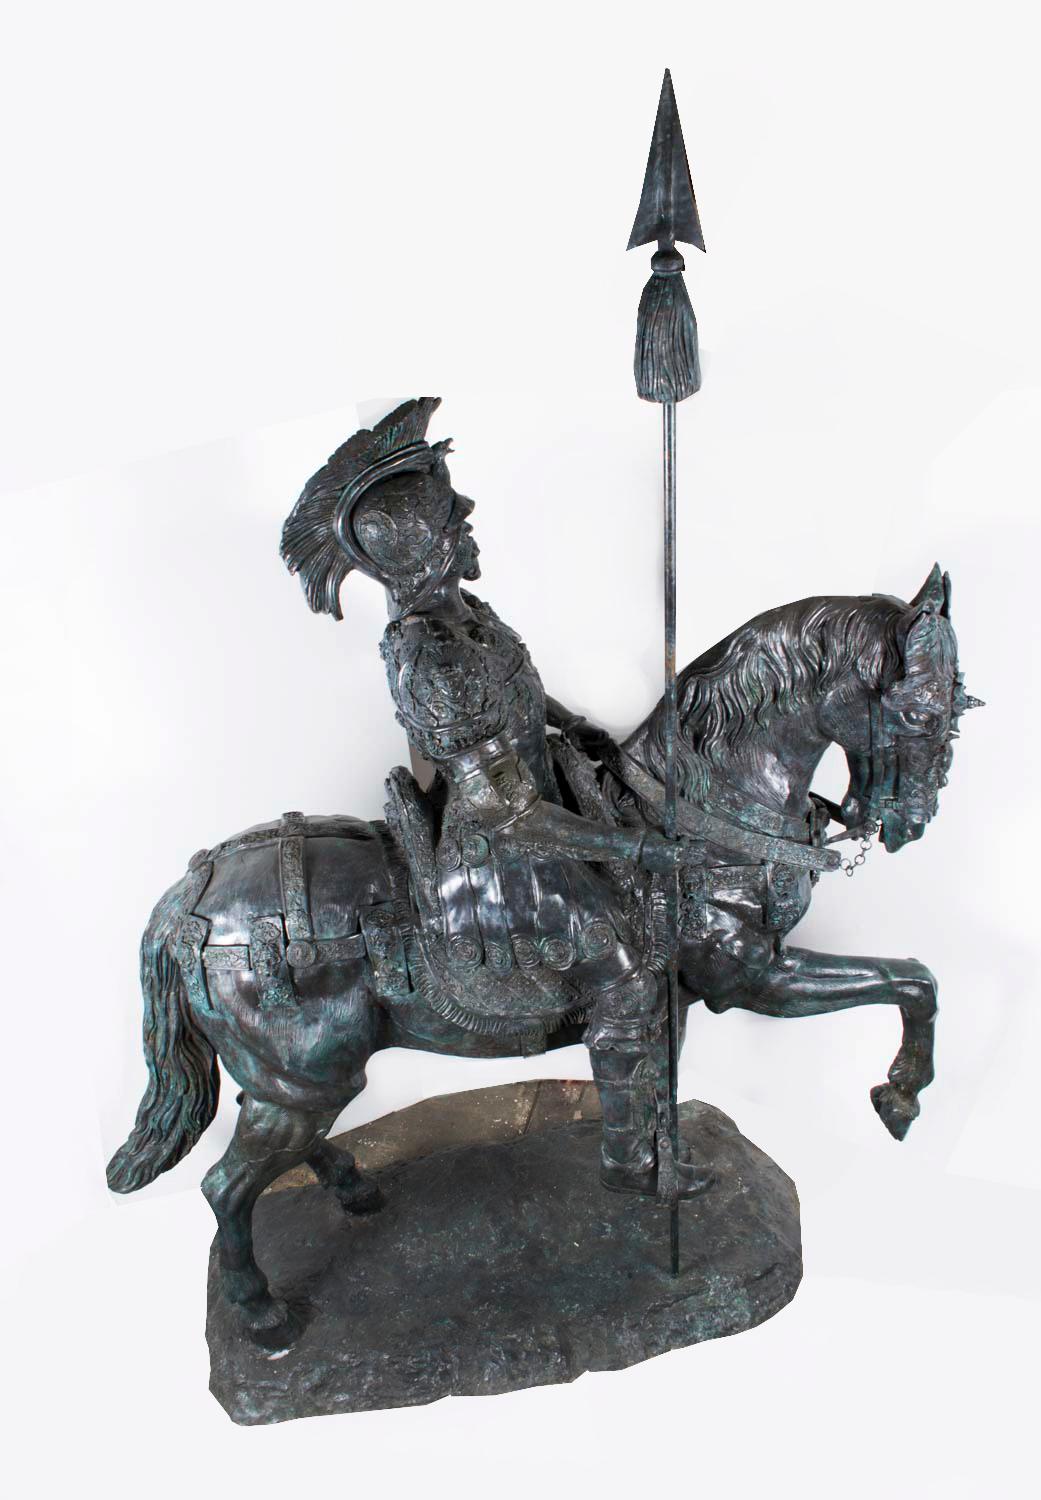 This is a beautiful ornately decorated Vintage life size bronze sculpture of a heavily armored Roman Cavalry officer  on horseback, riding triumphantly into battle, dating from the late 20th Century.

The armour is decorated in high relief with